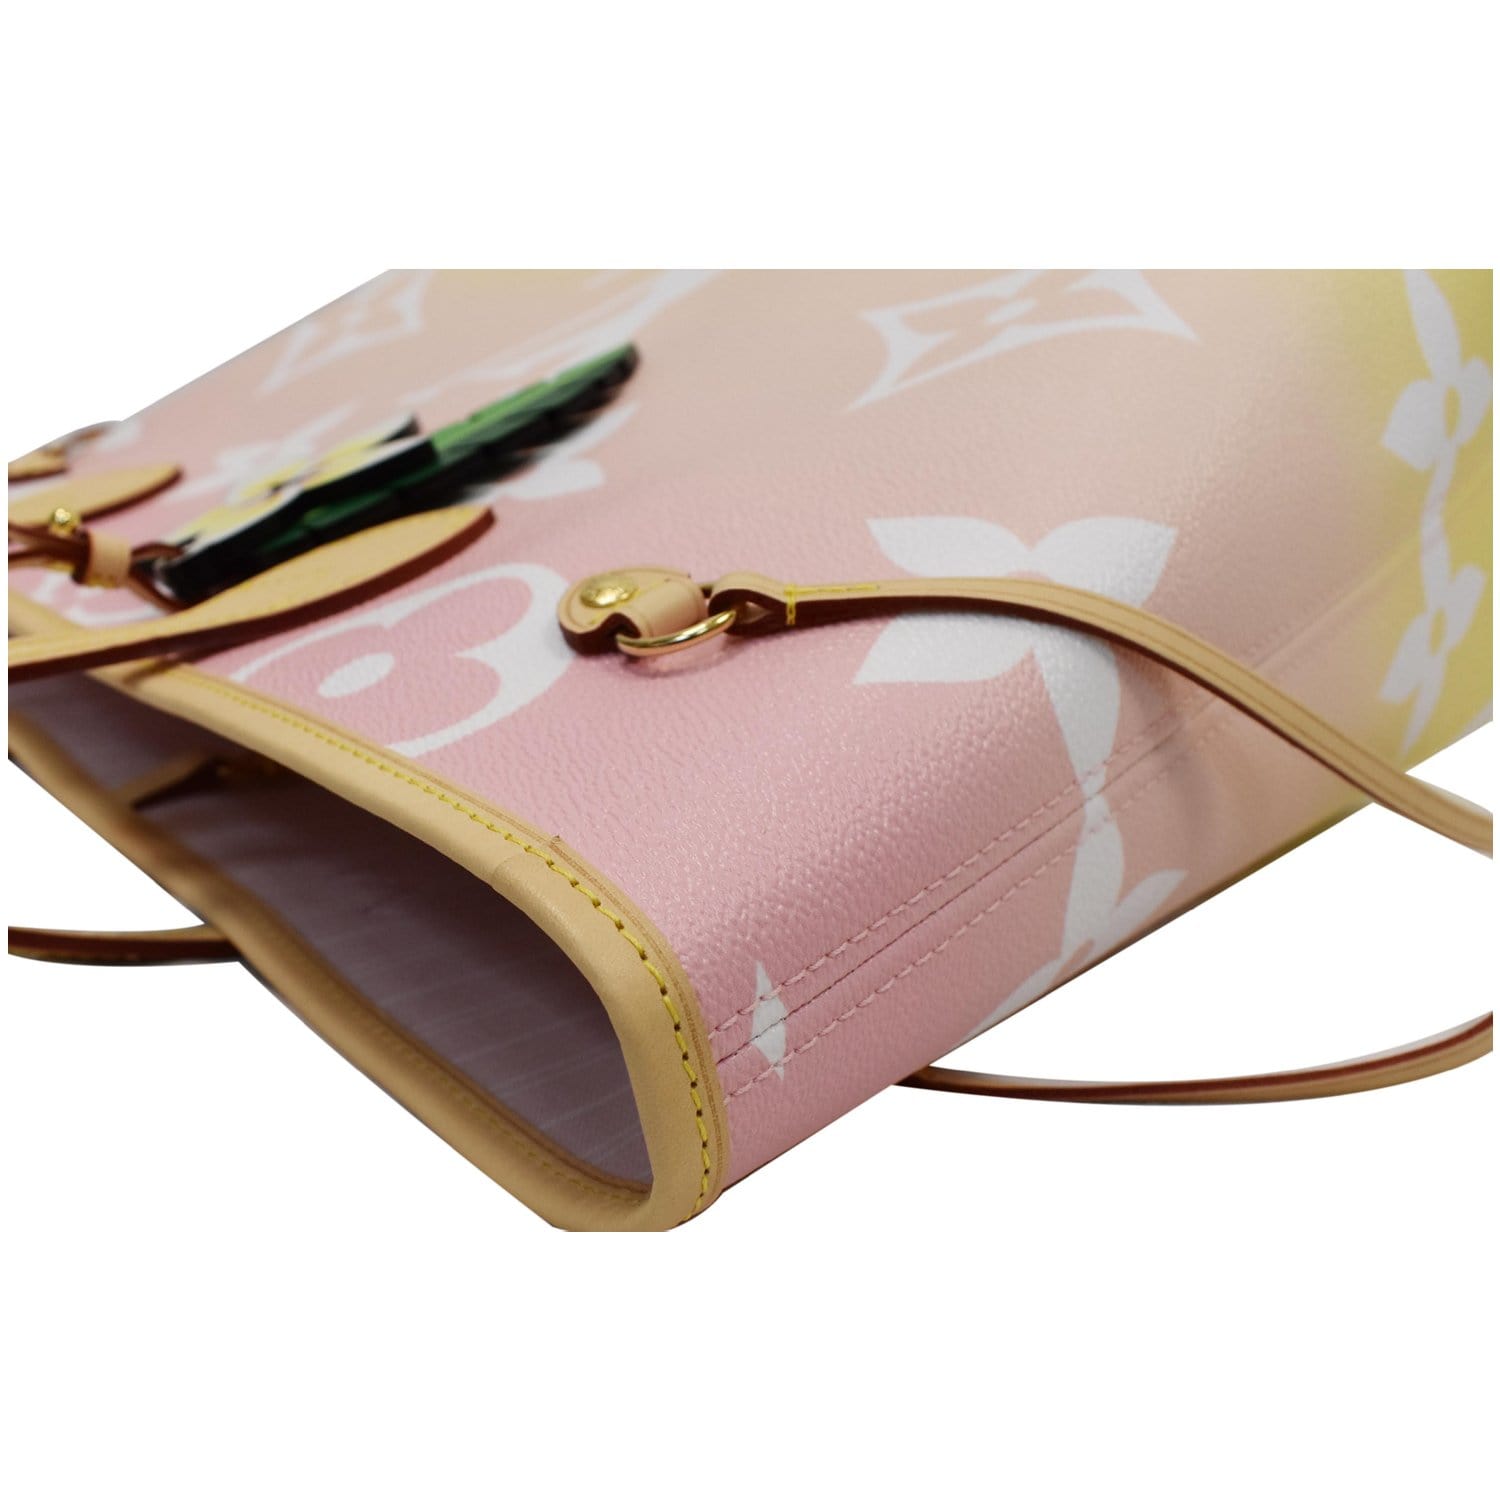 LOUIS VUITTON Monogram Giant By The Pool Neverfull MM Light Pink |  FASHIONPHILE